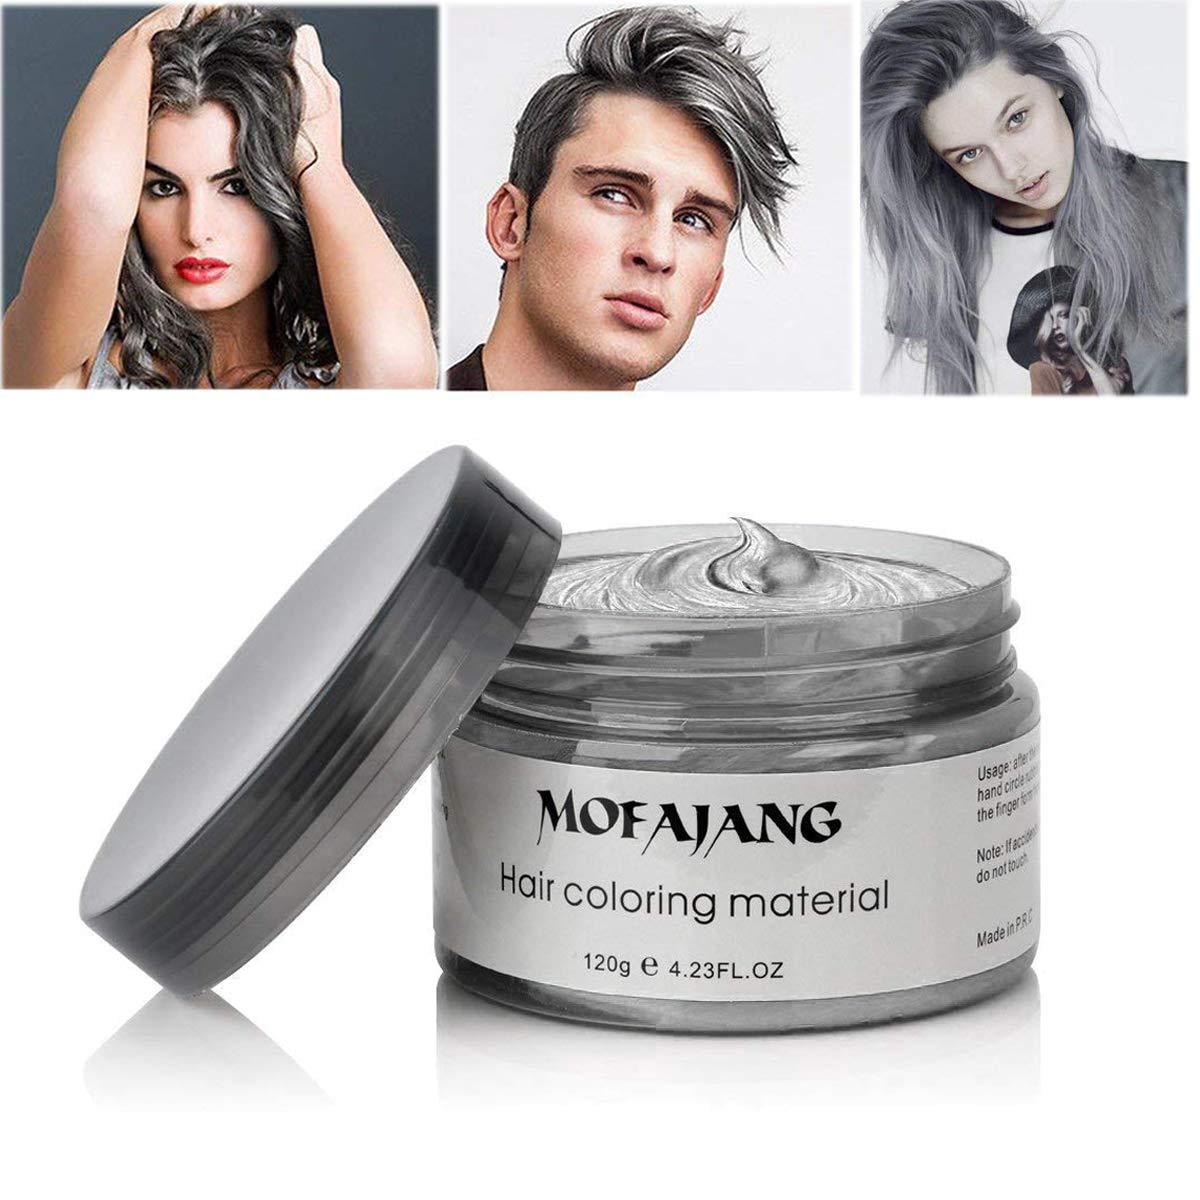 MOFAJANG Hair Coloring Dye Wax, Ash Grey Instant Hair Wax, Temporary  Hairstyle Cream  oz, Hair Pomades, Natural Hairstyle Wax for Men and  Women Party Cosplay 